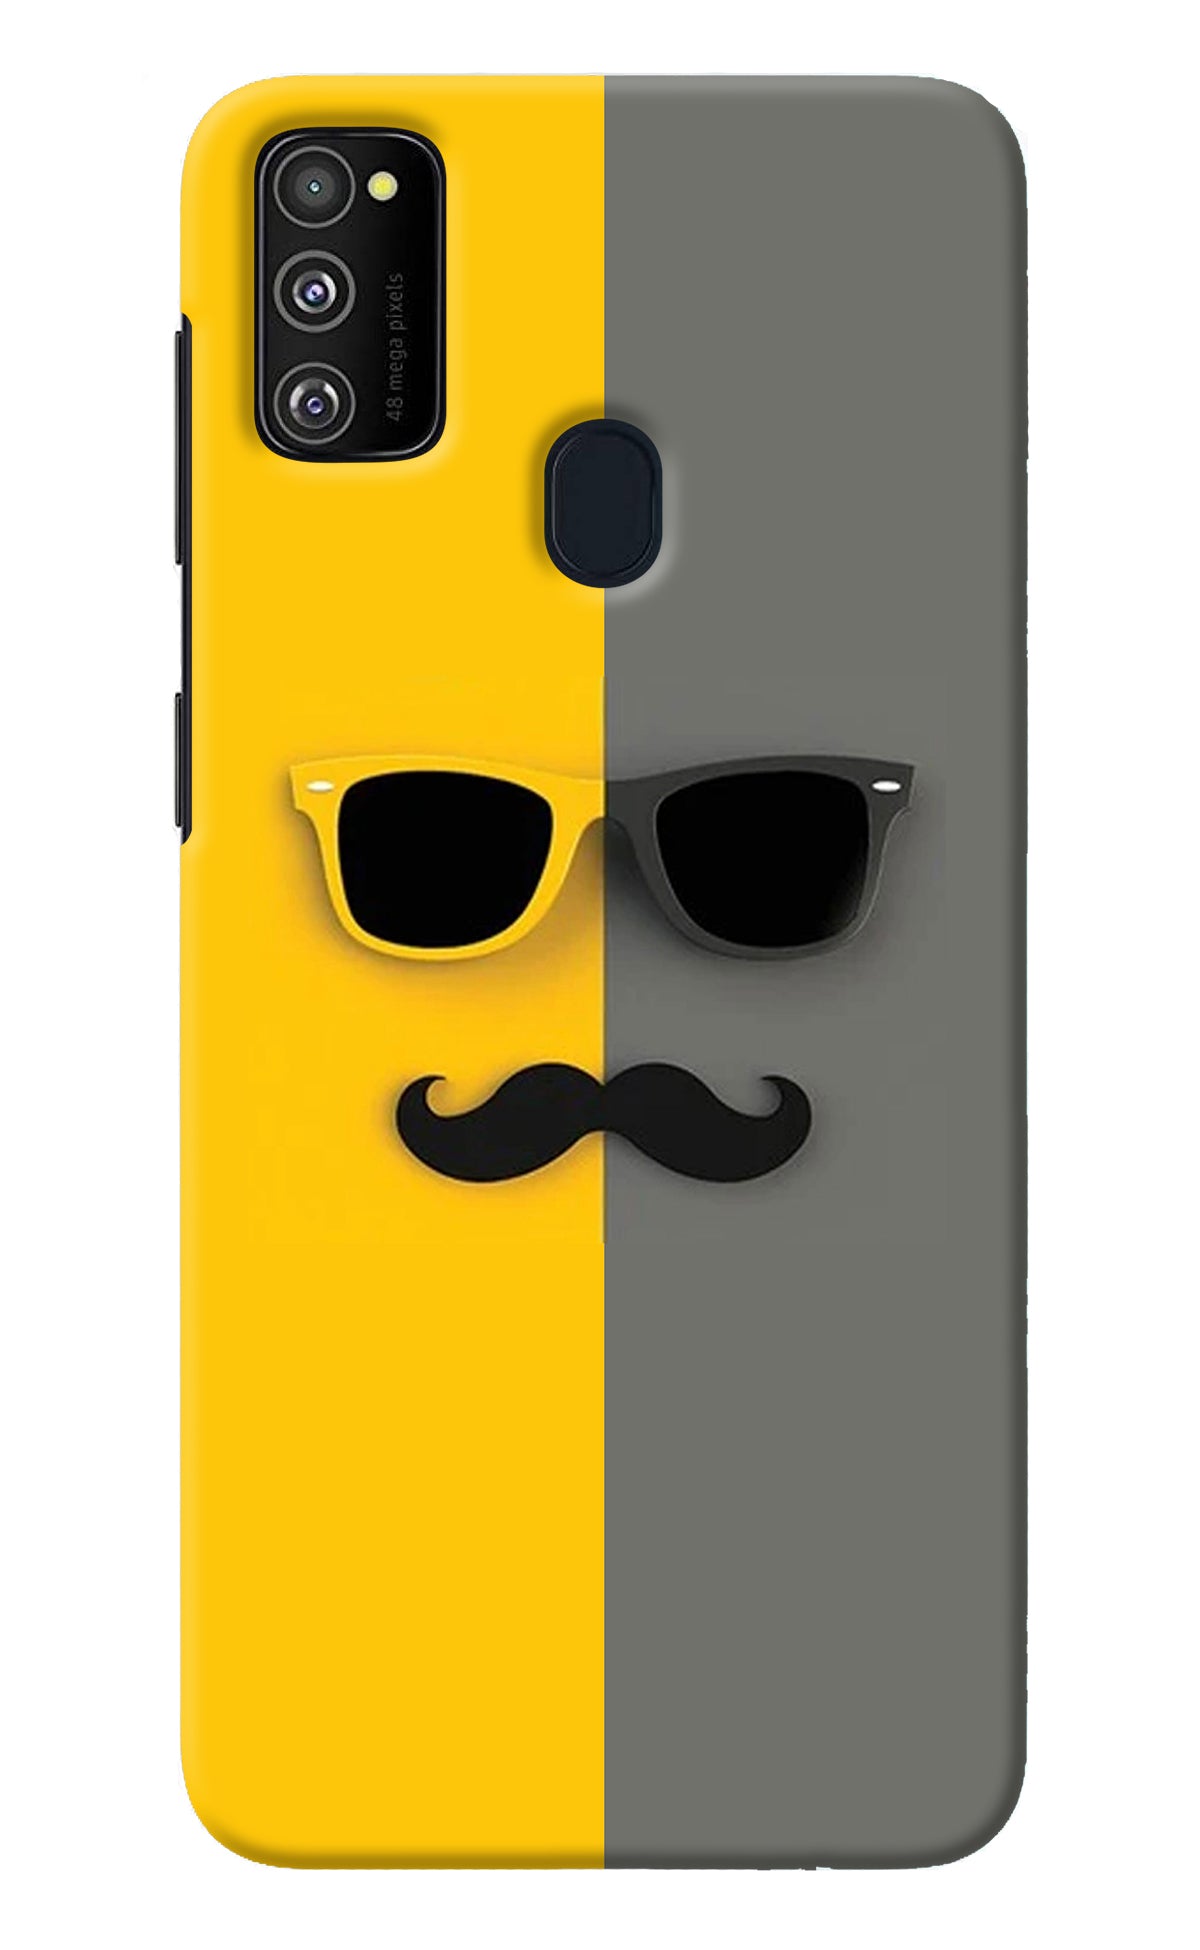 Sunglasses with Mustache Samsung M21 2020 Back Cover